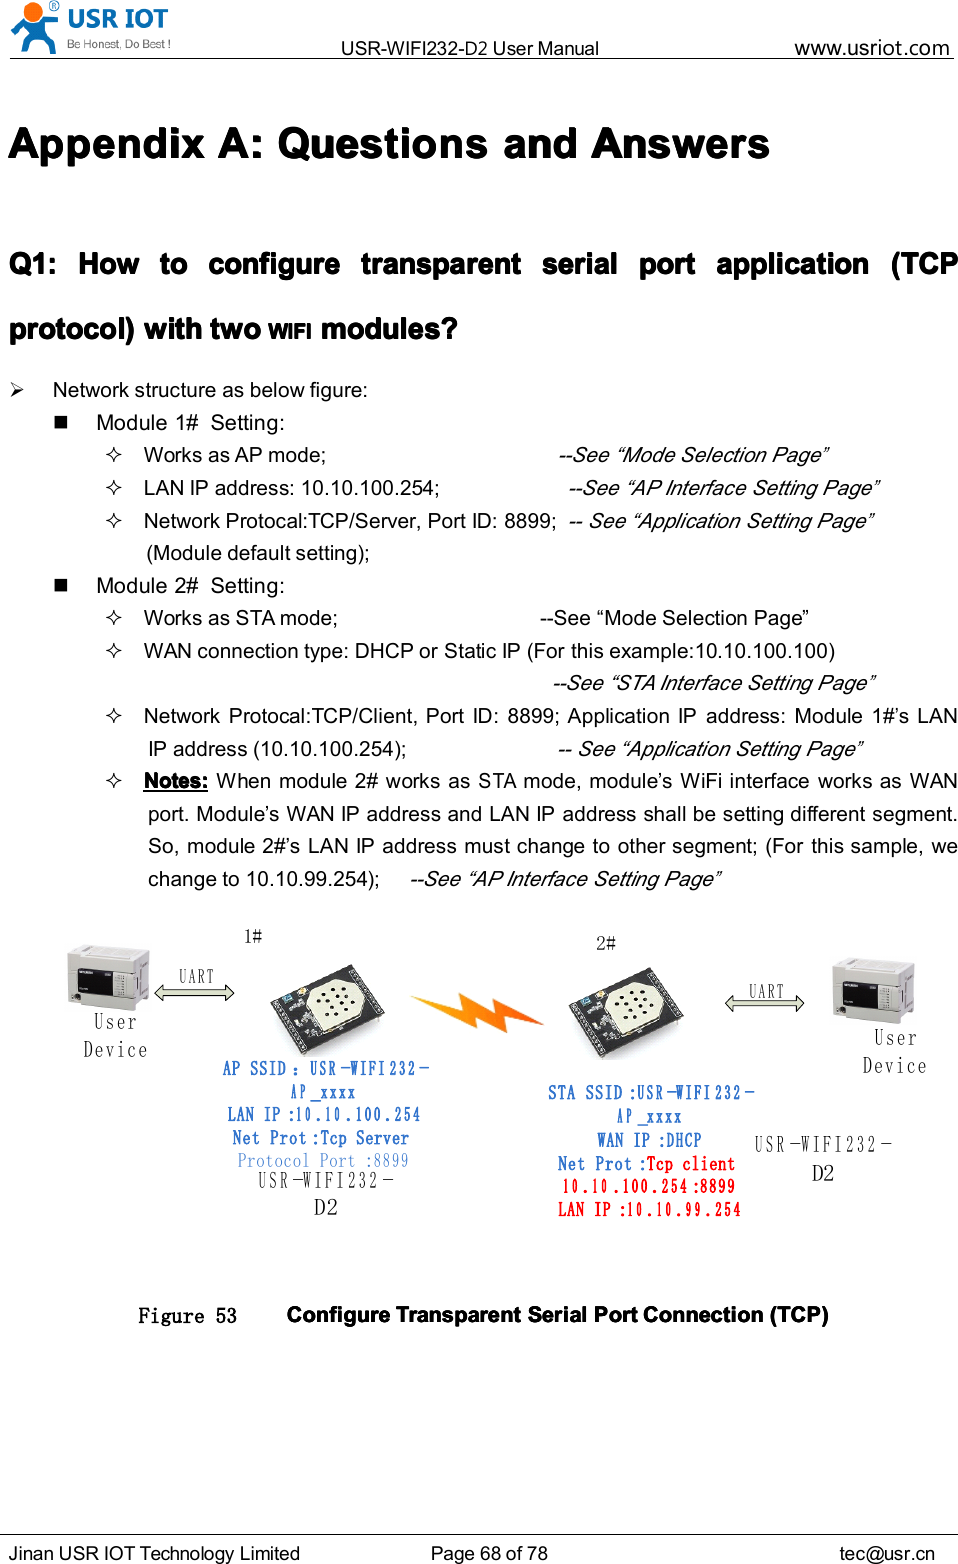 USR-WIFI232- D2 User Manual www.usr iot .comJinan USR IOT Technology Limited Page 68 of 78 tec@usr.cnAppendixAppendixAppendixAppendix AAAA :::: QuestionsQuestionsQuestionsQuestions andandandand AnswersAnswersAnswersAnswersQ1:Q1:Q1:Q1: HowHowHowHow totototo configureconfigureconfigureconfigure transparenttransparenttransparenttransparent serialserialserialserial portportportport applicationapplicationapplicationapplication (TCP(TCP(TCP(TCPprotocol)protocol)protocol)protocol) withwithwithwith twotwotwotwo WIFIWIFIWIFIWIFI modules?modules?modules?modules?Network structure as below figure:Module 1# Setting:Works as AP mode;--See “ Mode Selection Page”LAN IP address: 10.10.100.254;--See “ AP Interface Setting Page”Network Protocal:TCP/Server, Port ID: 8899;-- See “ Application Setting Page”(Module default setting);Module 2# Setting:Works as STA mode; --See “ Mode Selection Page ”WAN connection type: DHCP or Static IP (For this example:10.10.100.100)--See “ STA Interface Setting Page”Network Protocal:TCP/Client, Port ID: 8899; Application IP address: Module 1#’s LANIP address (10.10.100.254);-- See “ Application Setting Page”Notes:Notes:Notes:Notes: When module 2# works asSTAmode, module ’ s WiFi interface works as WANport. Module ’ s WAN IP address and LAN IP address shall be setting different segment.So, module 2# ’ s LAN IP address must change to other segment; (For this sample, wechange to 10.10.99.254);--See “ AP Interface Setting Page”USR-WIFI232-D 2User DeviceUARTUSR-WIFI232-D 2UARTAP SSID：USR-WIFI232-AP_xxxxLAN IP:10.10.100.254Net Prot:Tcp ServerProtocol Port:8899STA SSID:USR-WIFI232-AP_xxxxWAN IP:DHCPNet Prot:Tcp client10.10.100.254:8899LAN IP:10.10.99.2541 #2 #User DeviceFigure 53 ConfigureConfigureConfigureConfigure TransparentTransparentTransparentTransparent SerialSerialSerialSerial PortPortPortPort ConnectionConnectionConnectionConnection (TCP)(TCP)(TCP)(TCP)